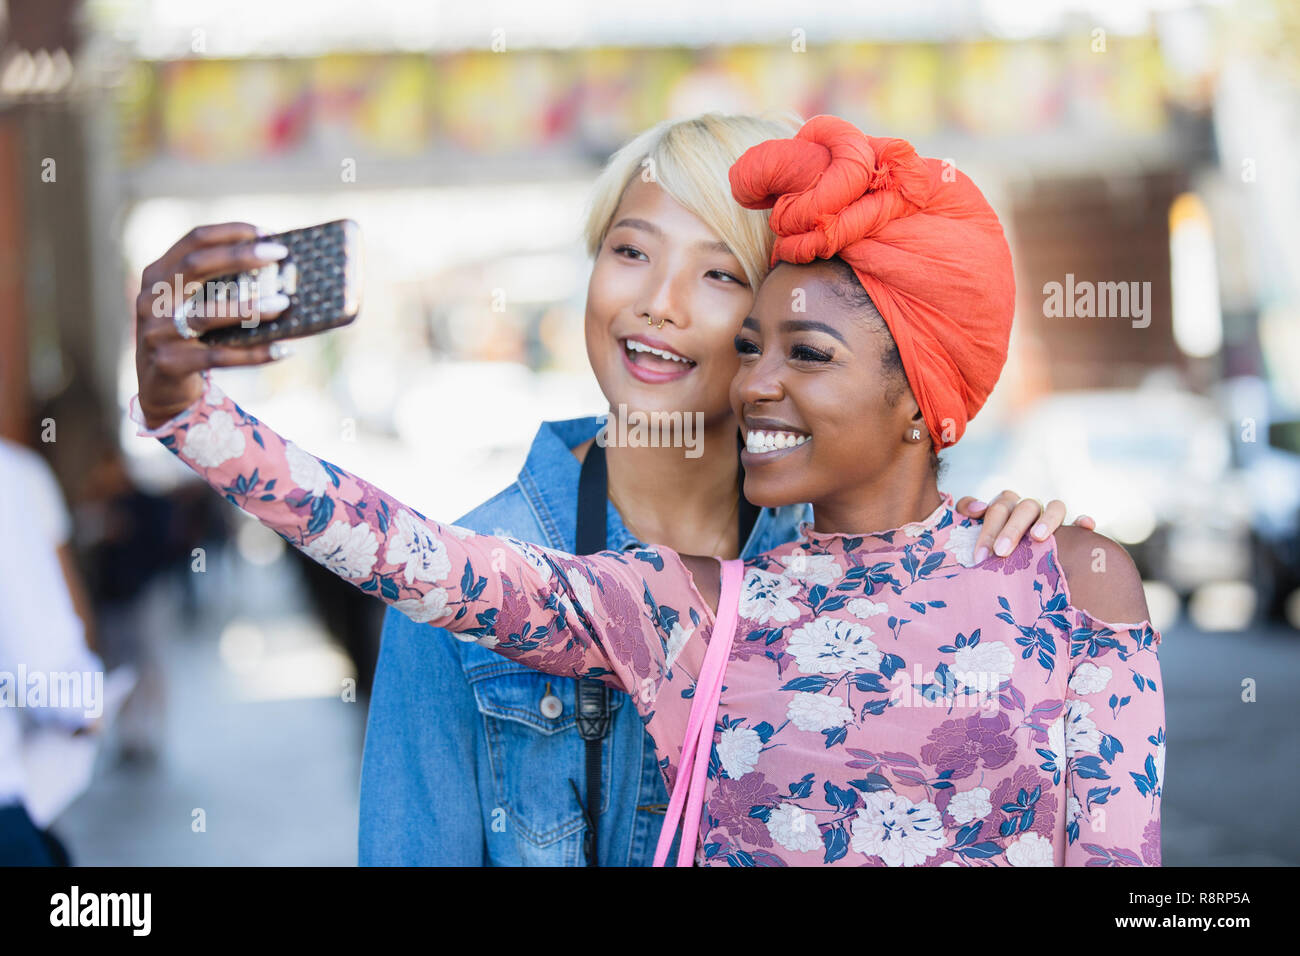 Happy young women taking selfie with camera phone Stock Photo